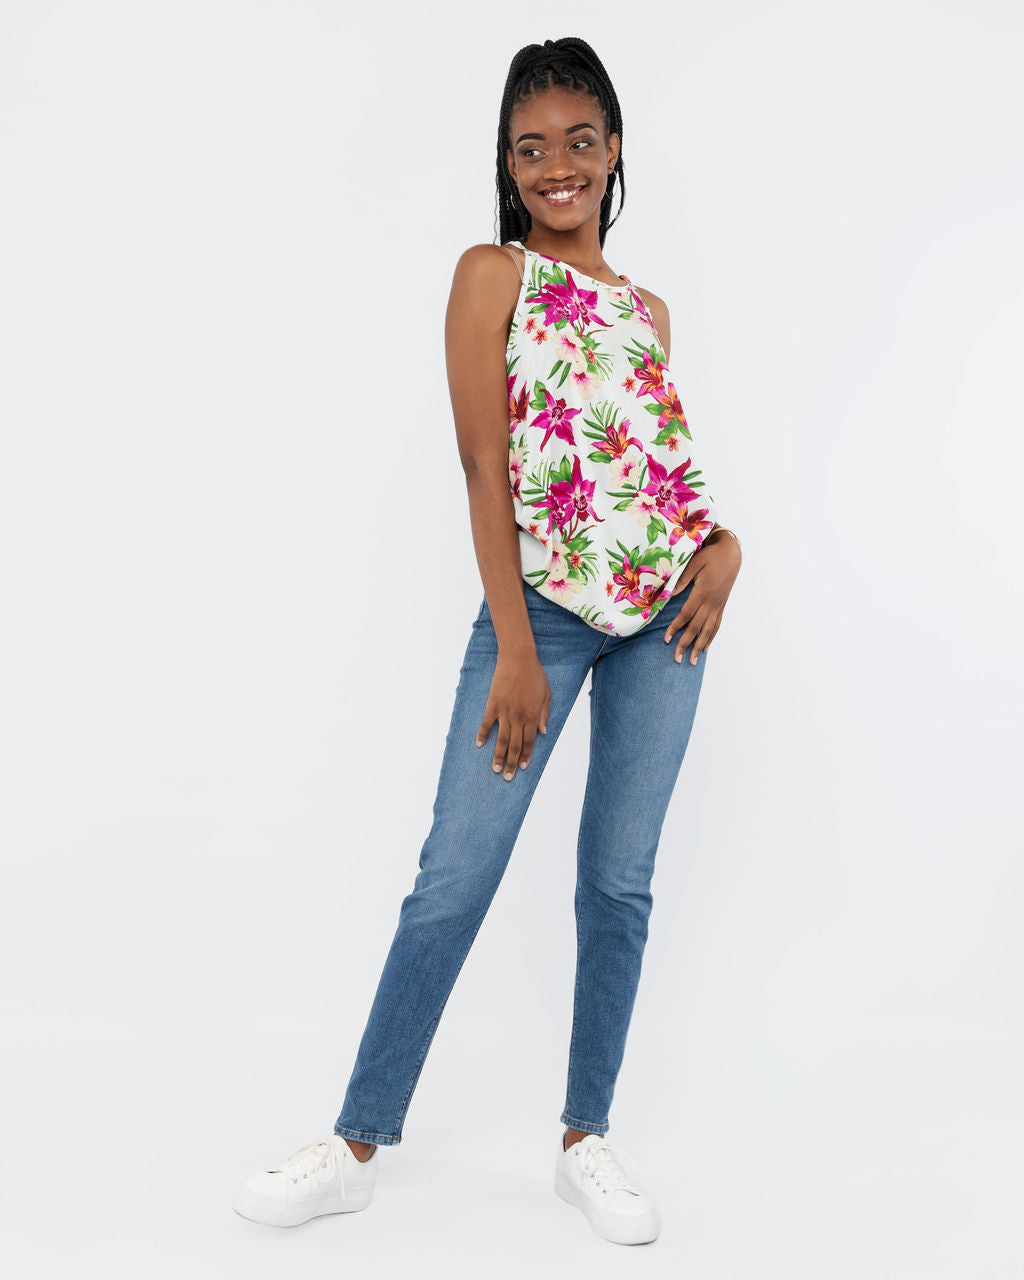 WHITE , CERISE & GREEN FLORAL TOP